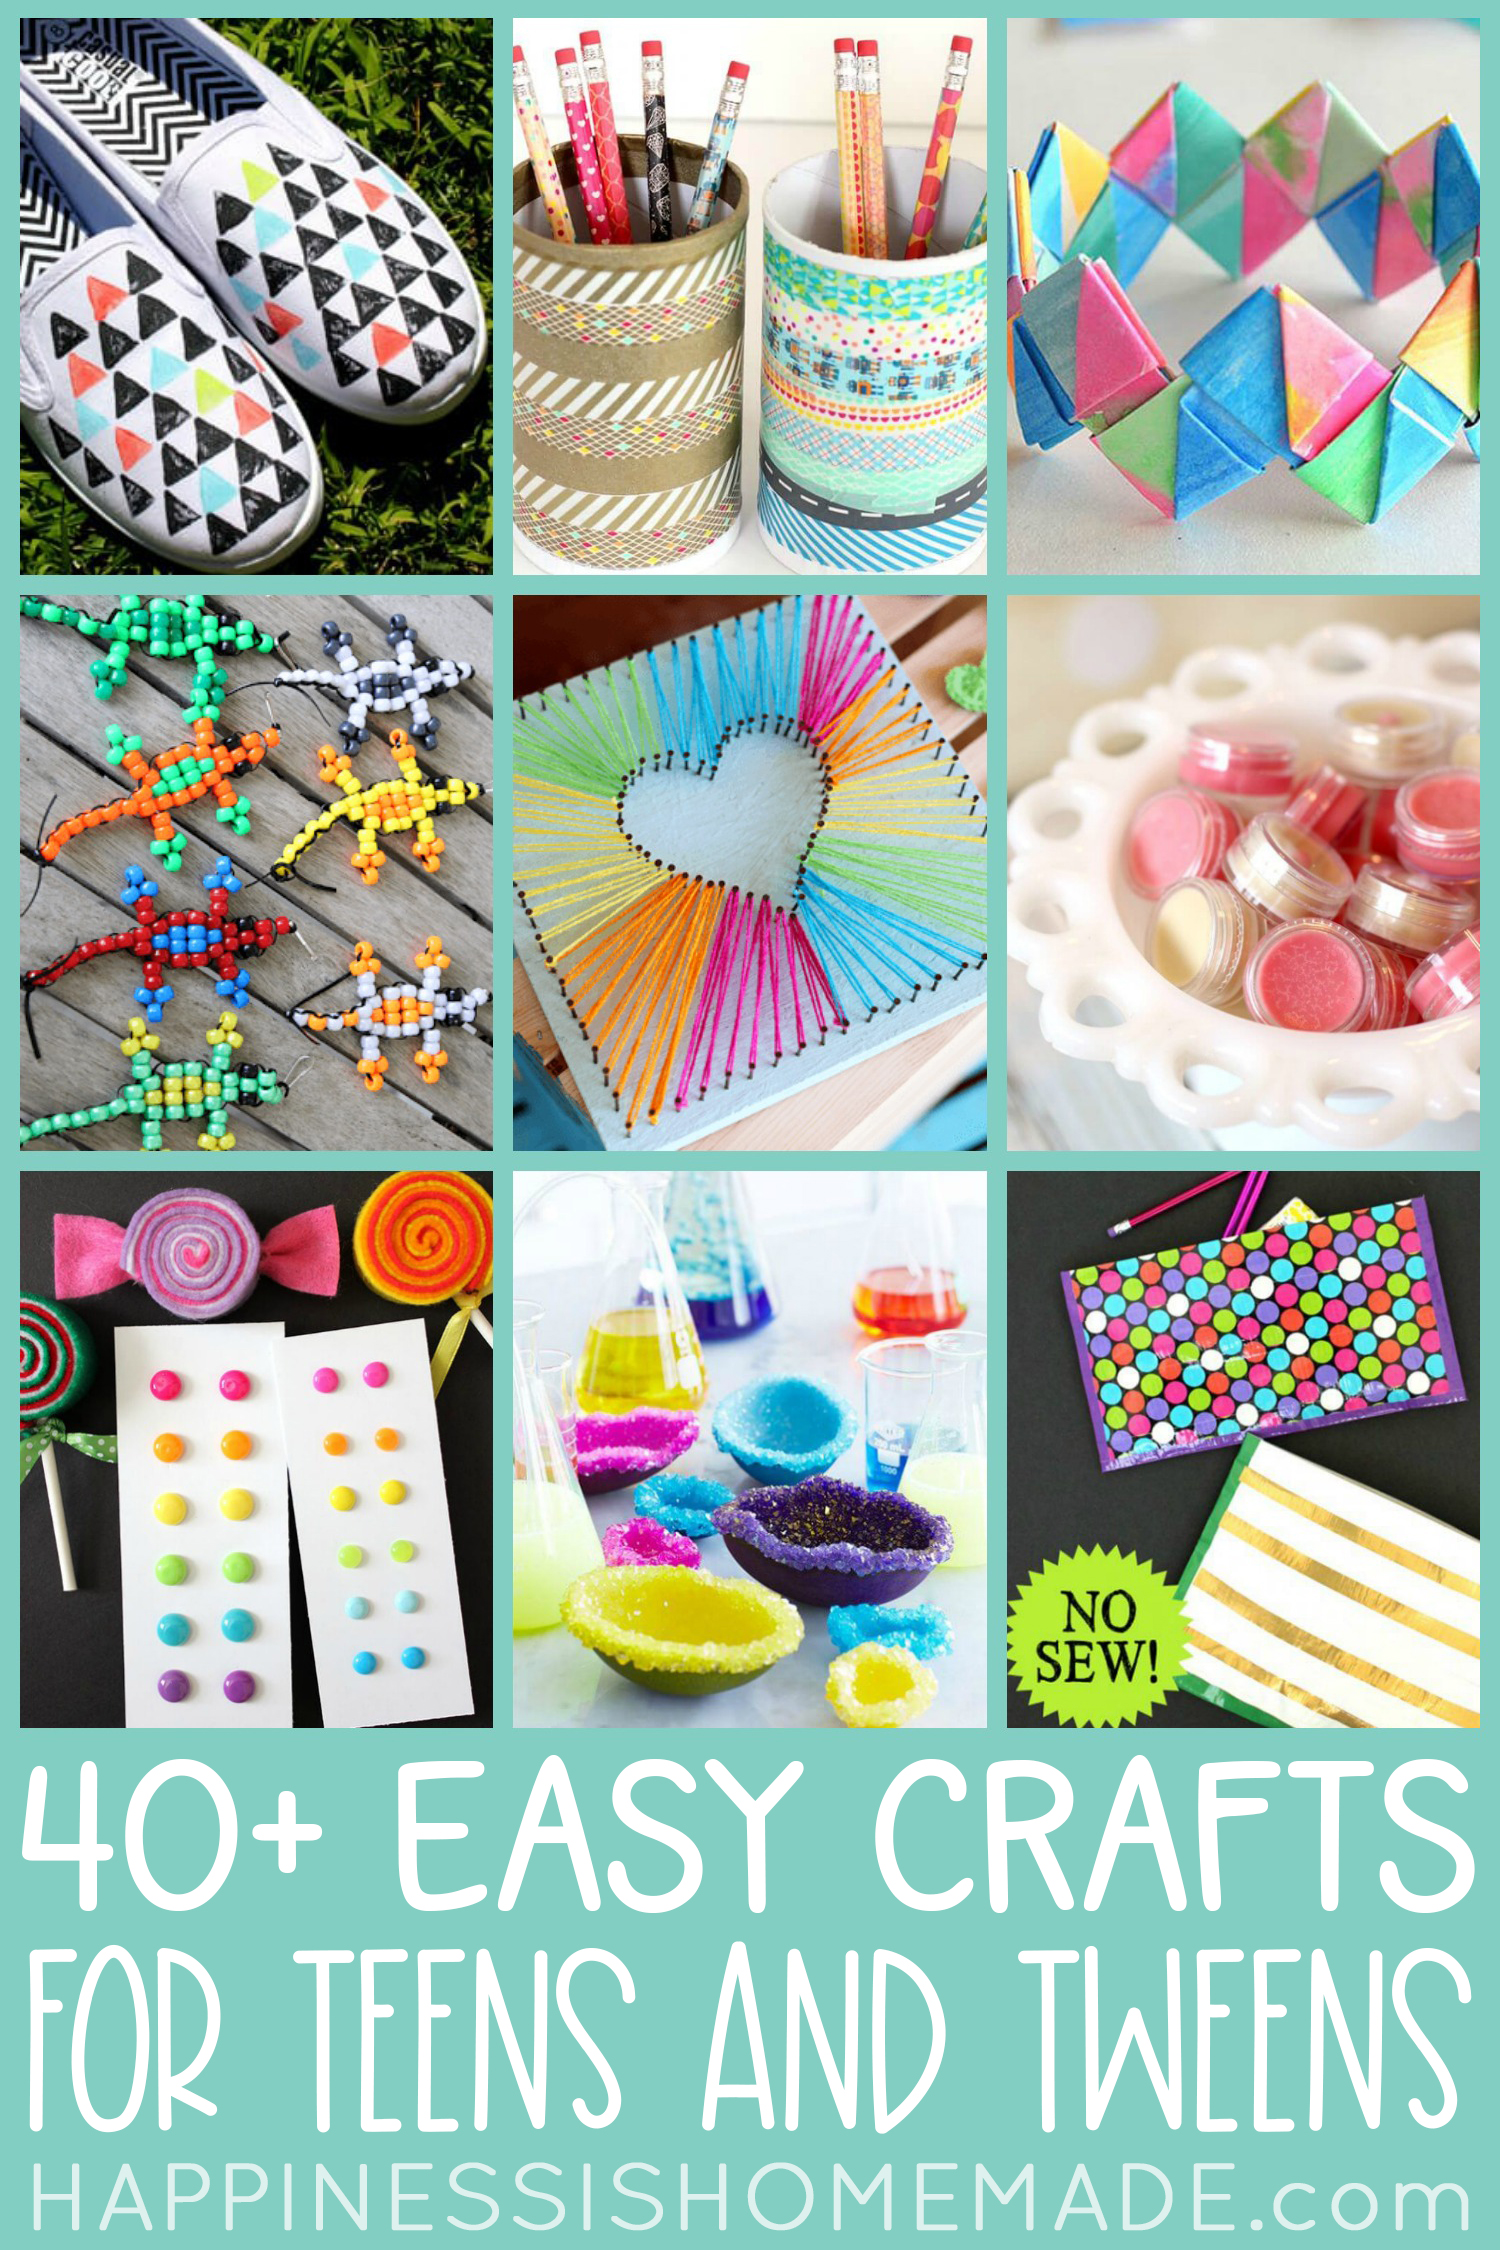 12 Easy Crafts for Toddlers - My Bored Toddler Easy and lots of fun!